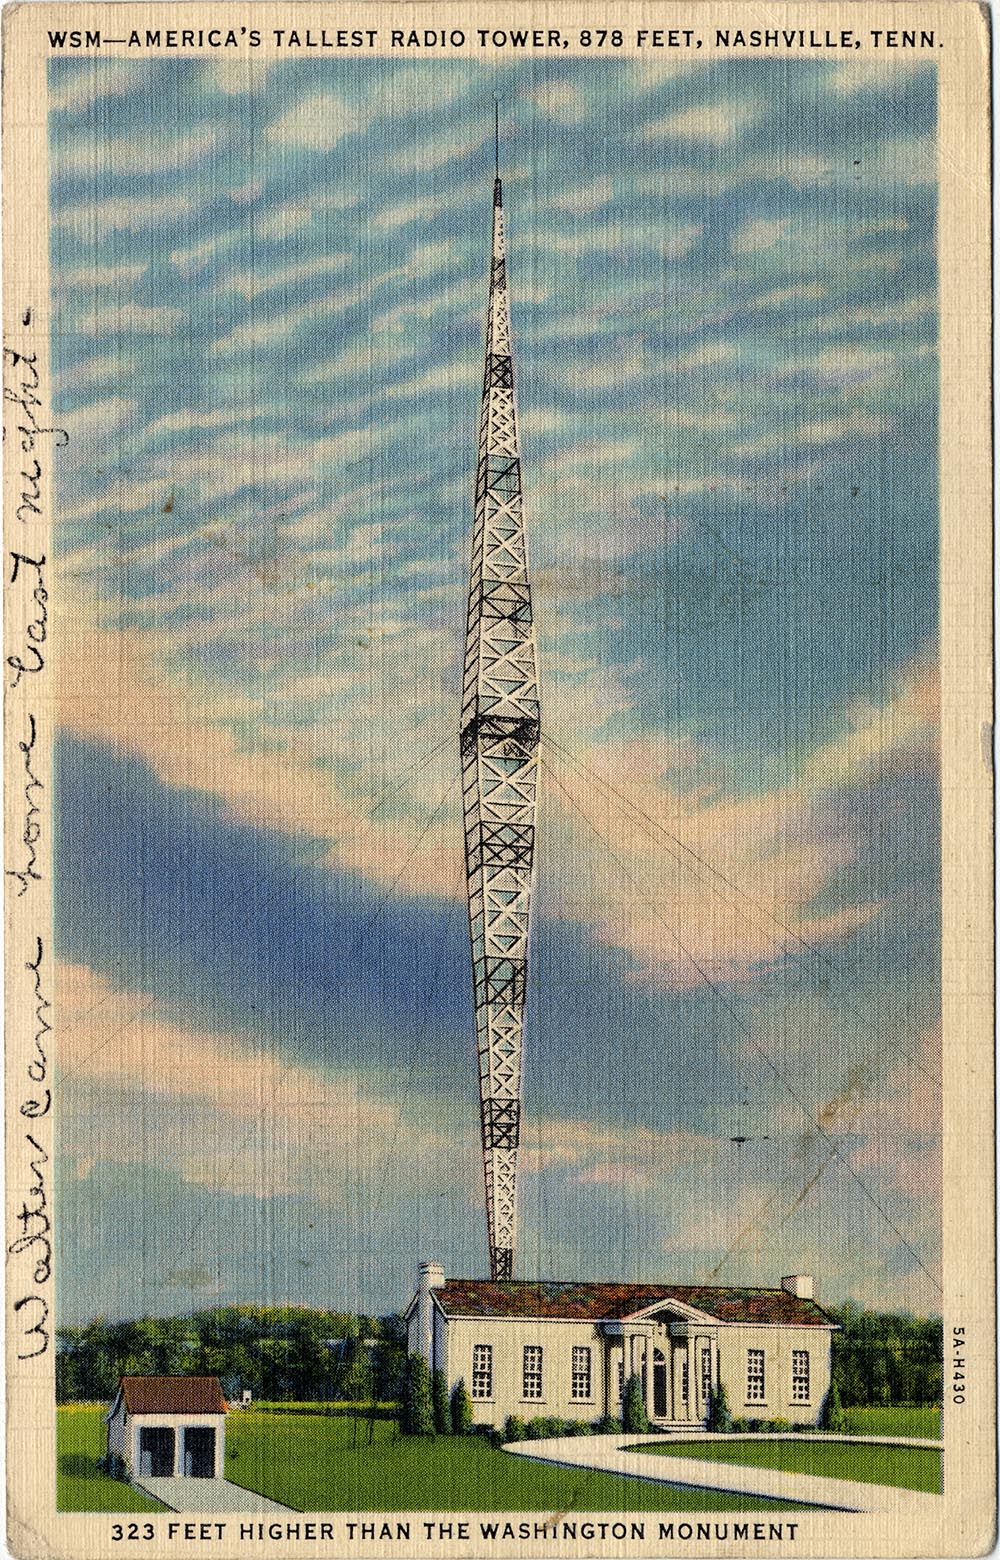 Postcard of the WSM Radio Tower in Nashville